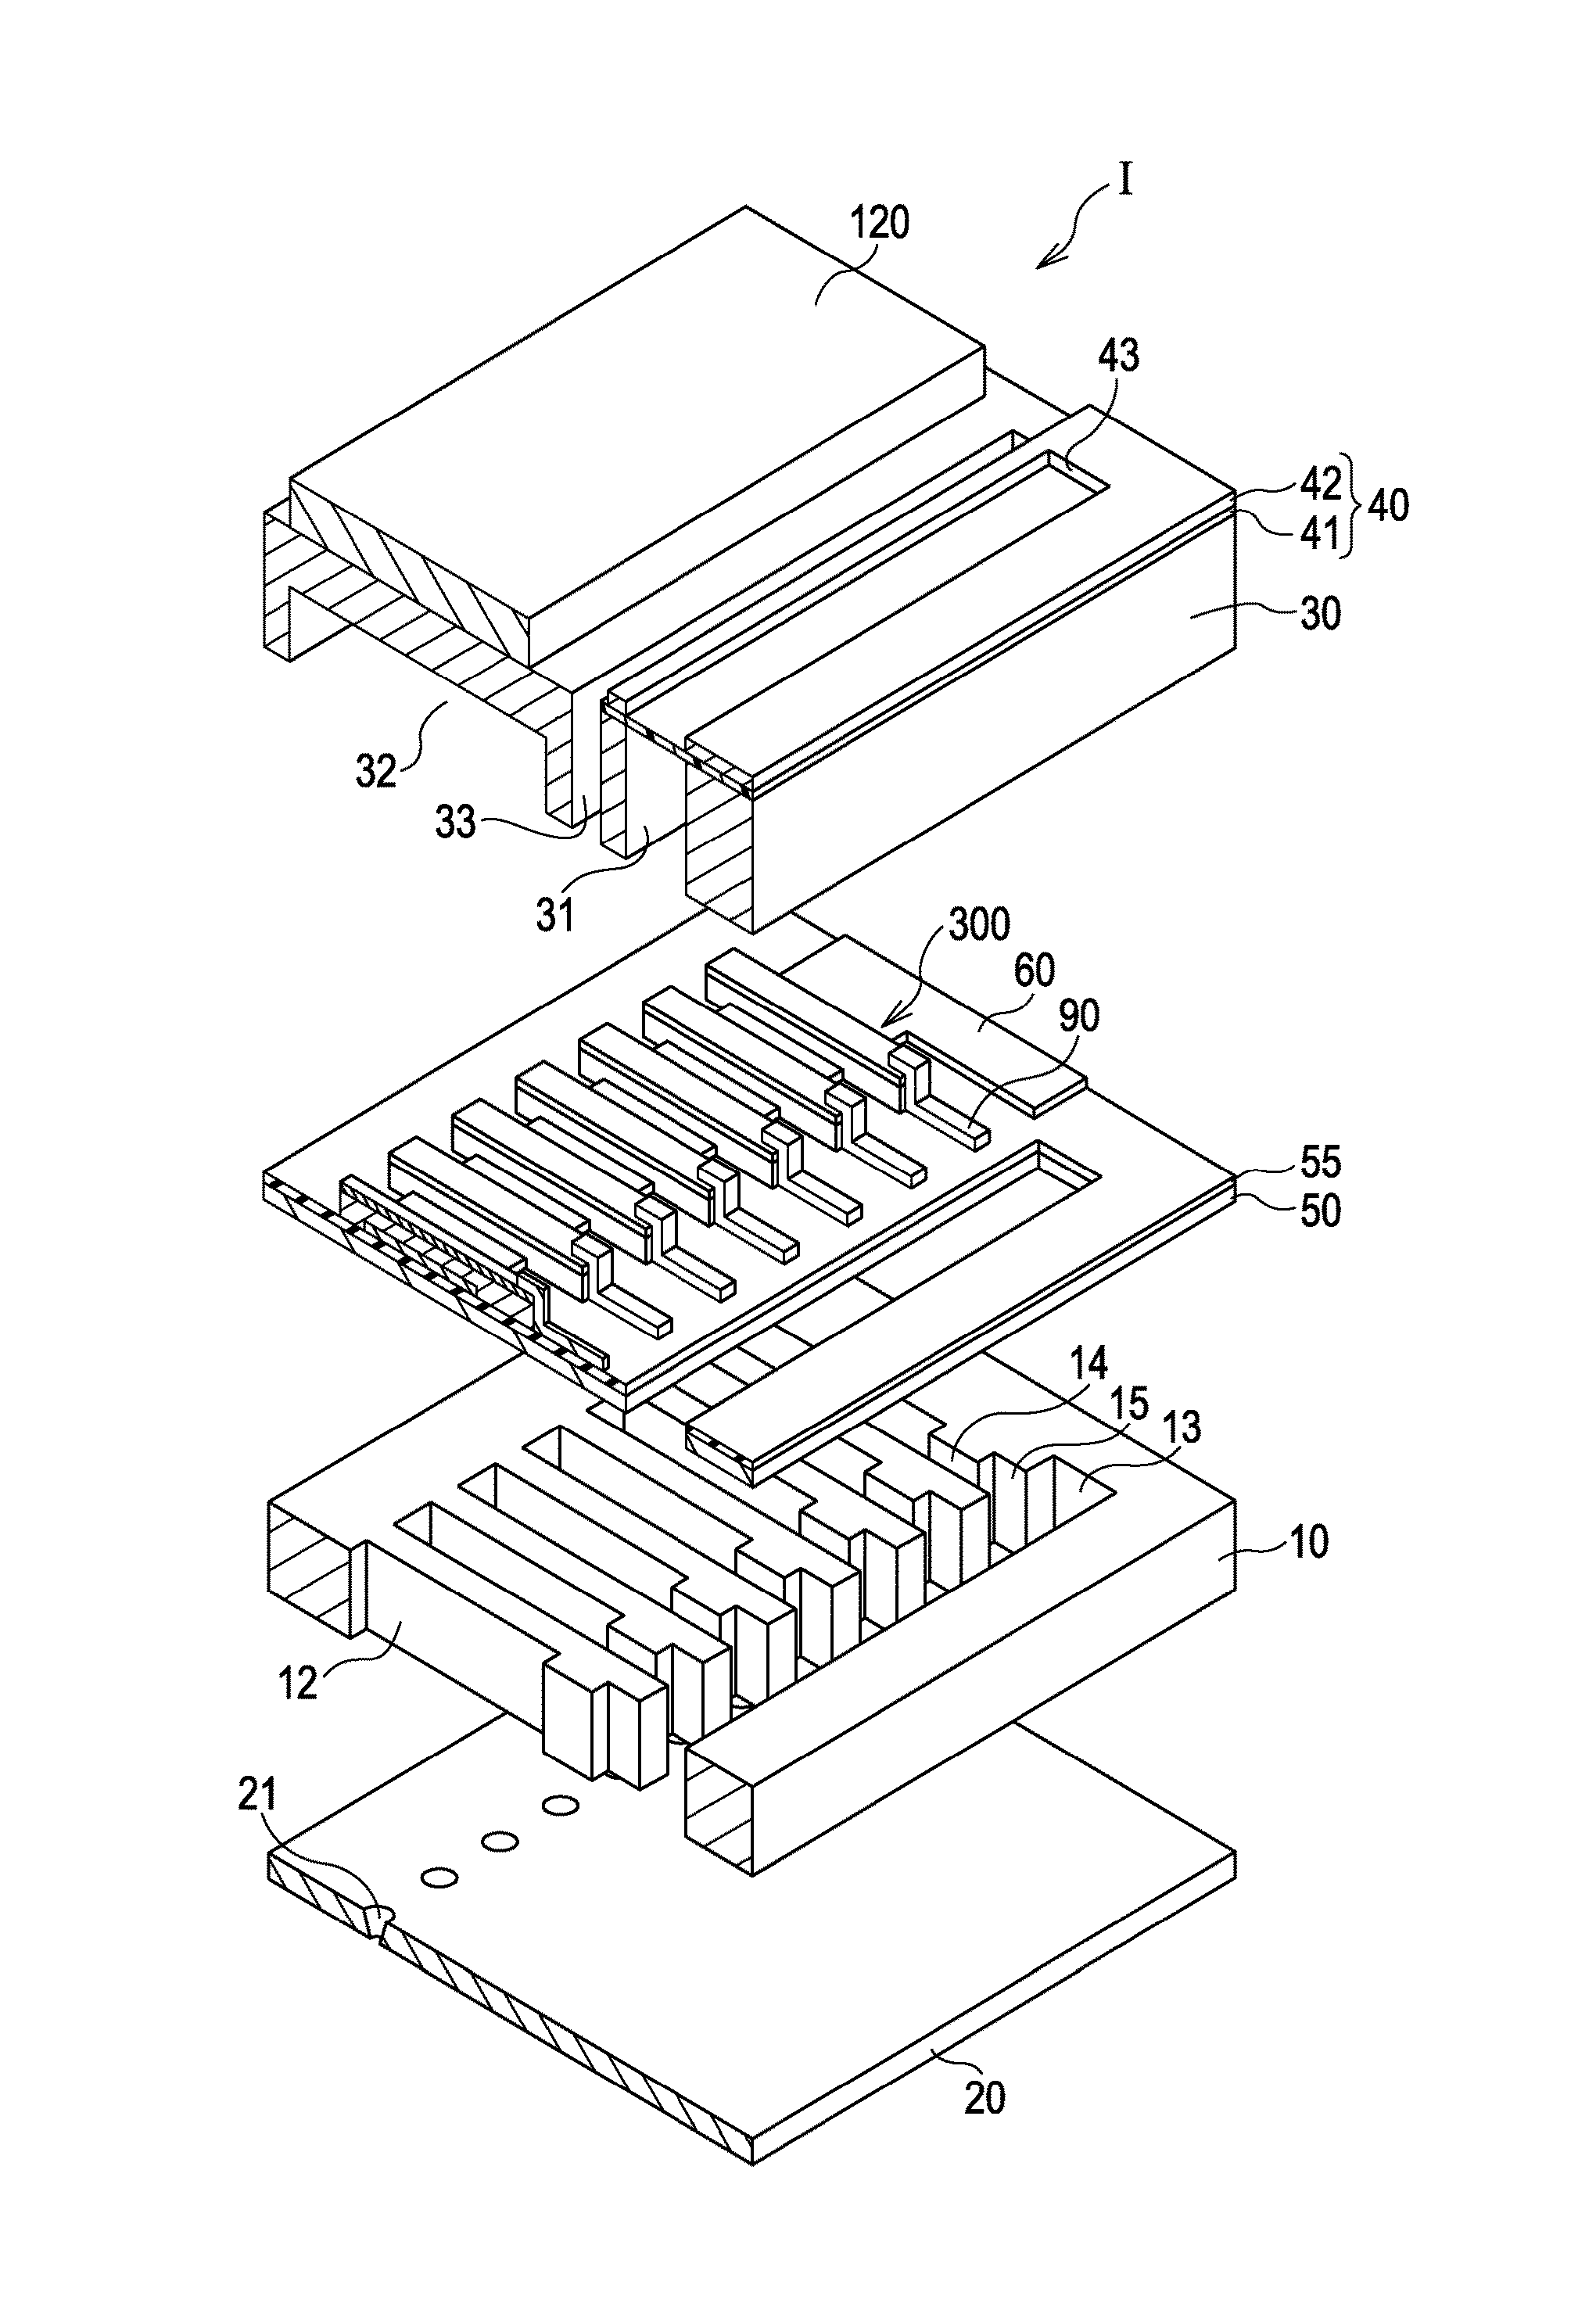 Liquid-ejecting head, liquid-ejecting apparatus, piezoelectric element, and method for manufacturing liquid-ejecting head